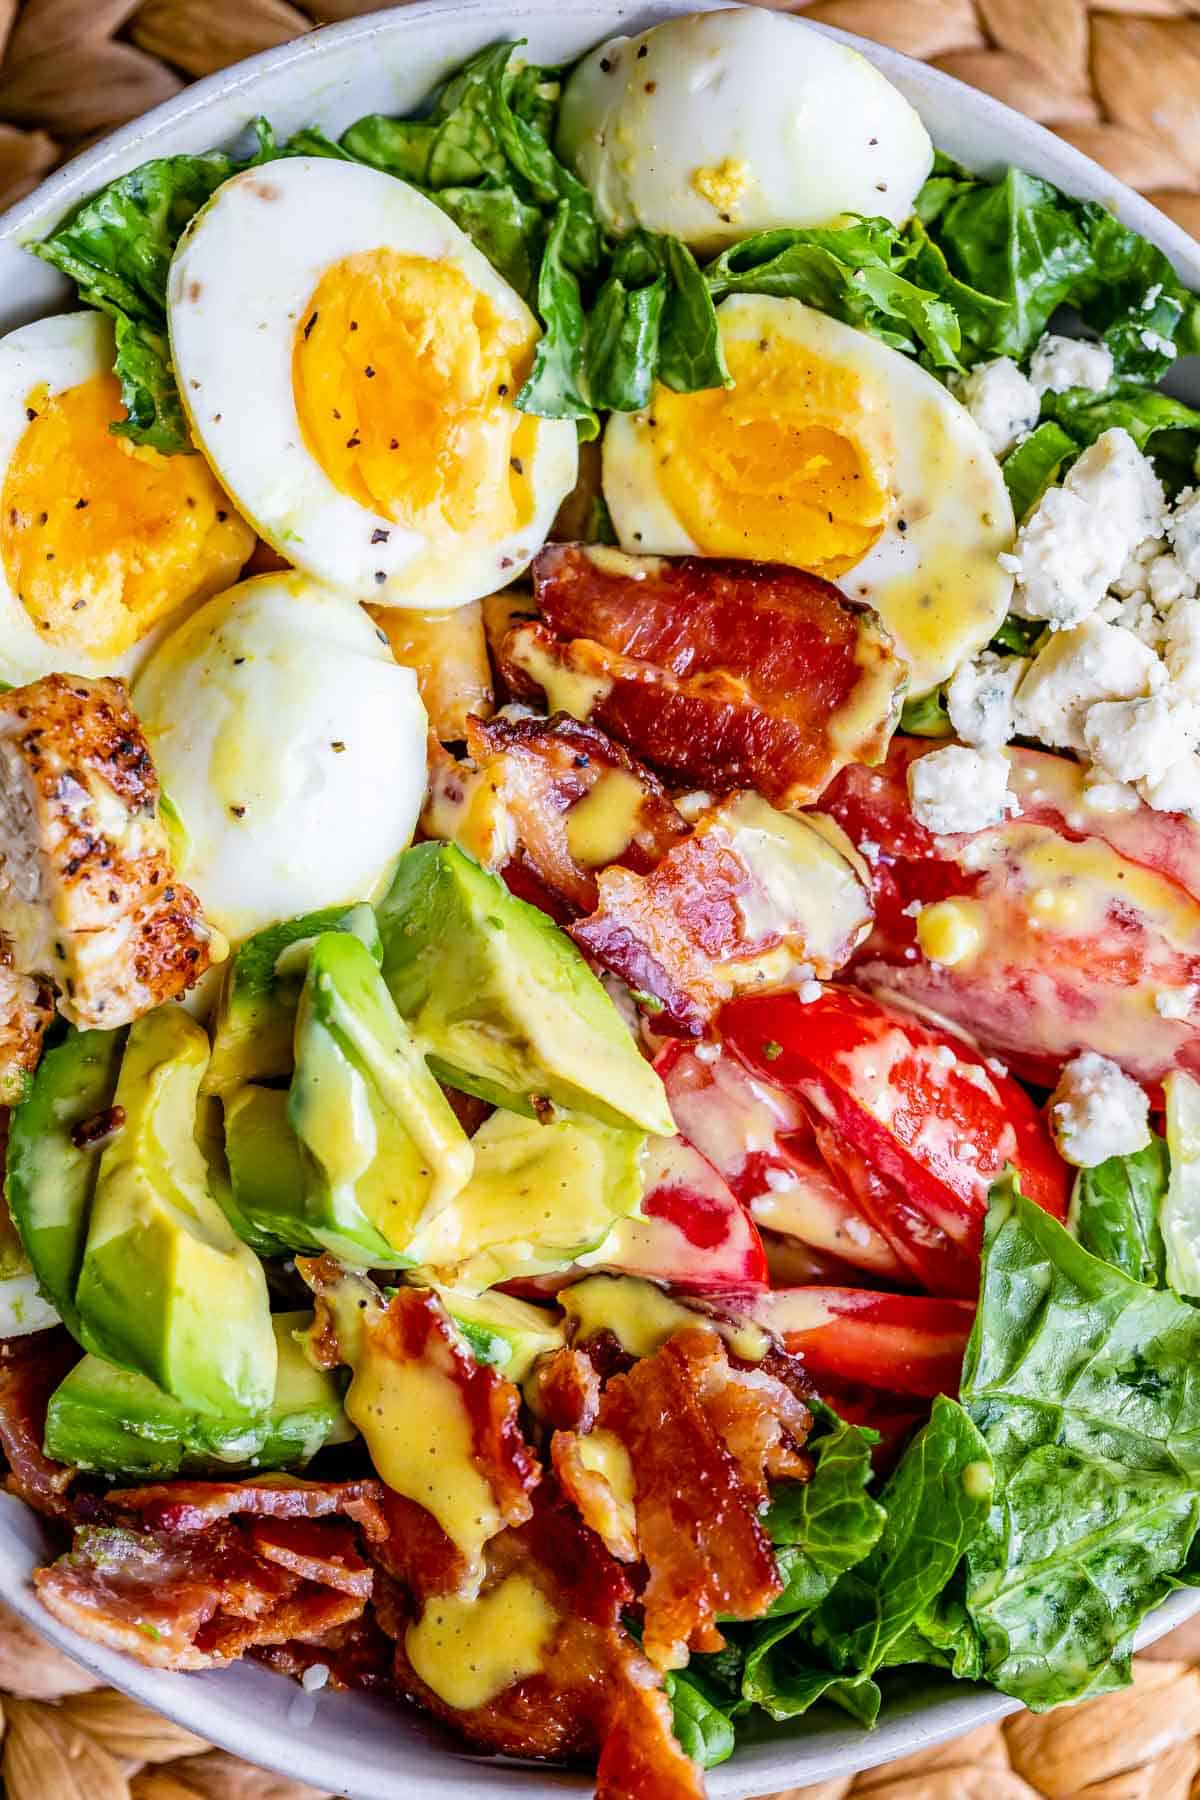 https://thefoodcharlatan.com/wp-content/uploads/2021/06/Loaded-Cobb-Salad-Recipe-with-Chicken-and-Bacon-14.jpg